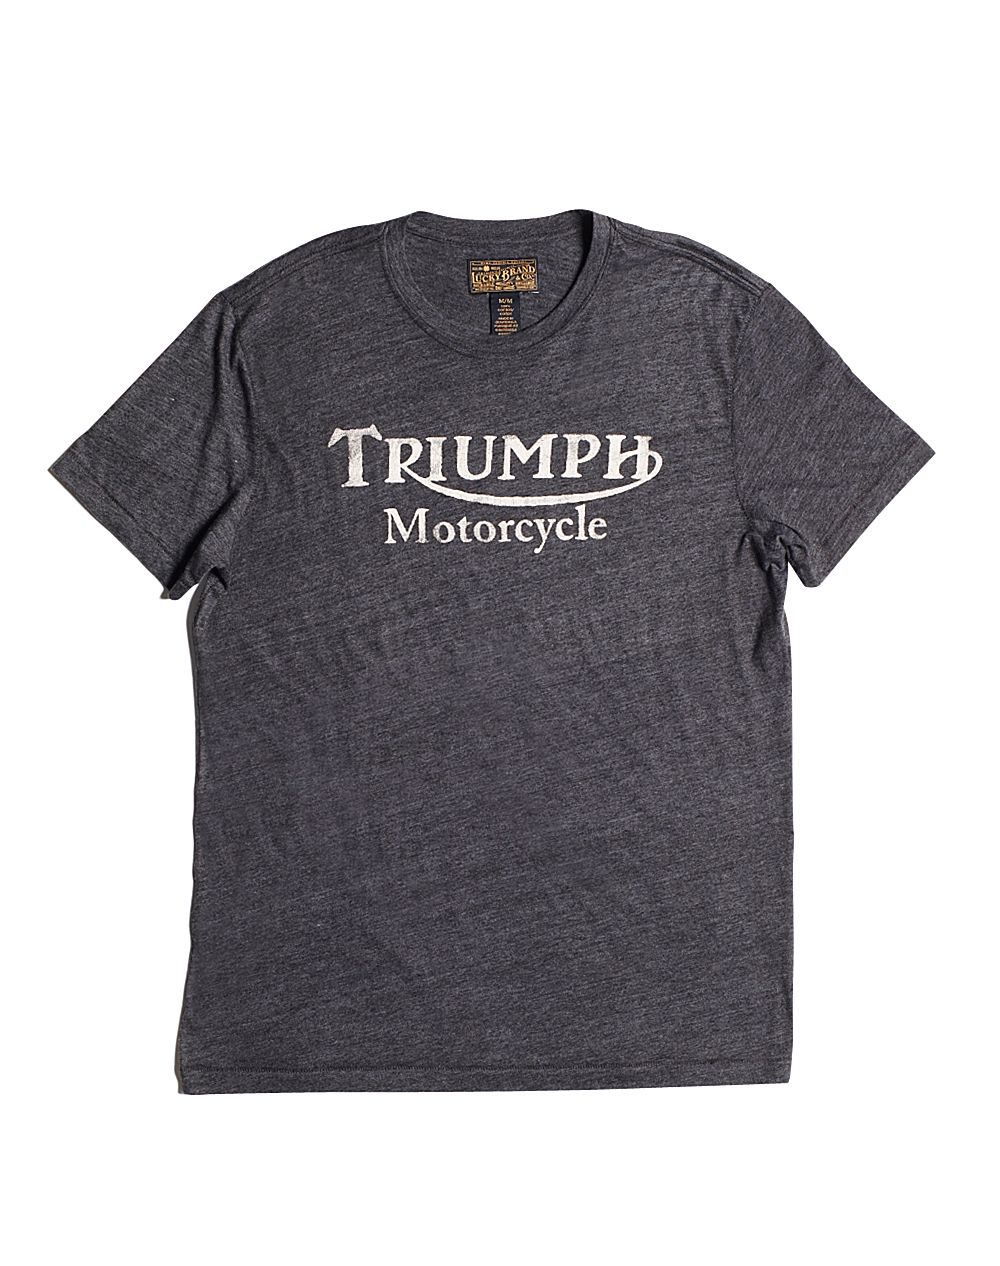 Lucky Brand Triumph Motorcycle T-shirt in Gray for Men - Lyst